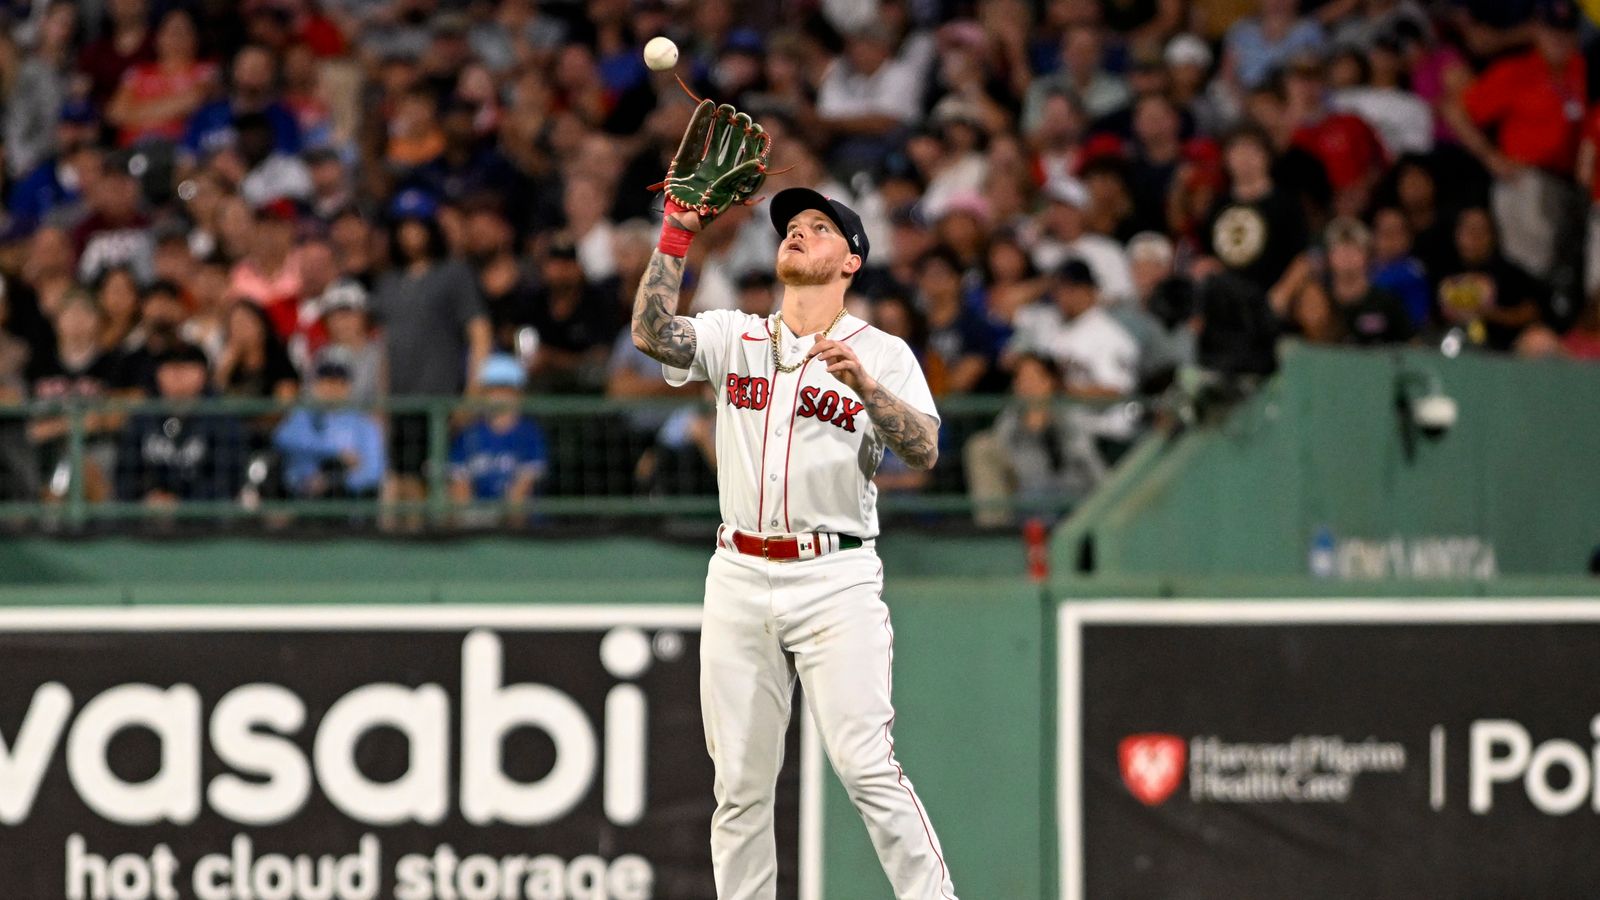 Alex Verdugo's two homers lead Red Sox to 5-3 win over Blue Jays